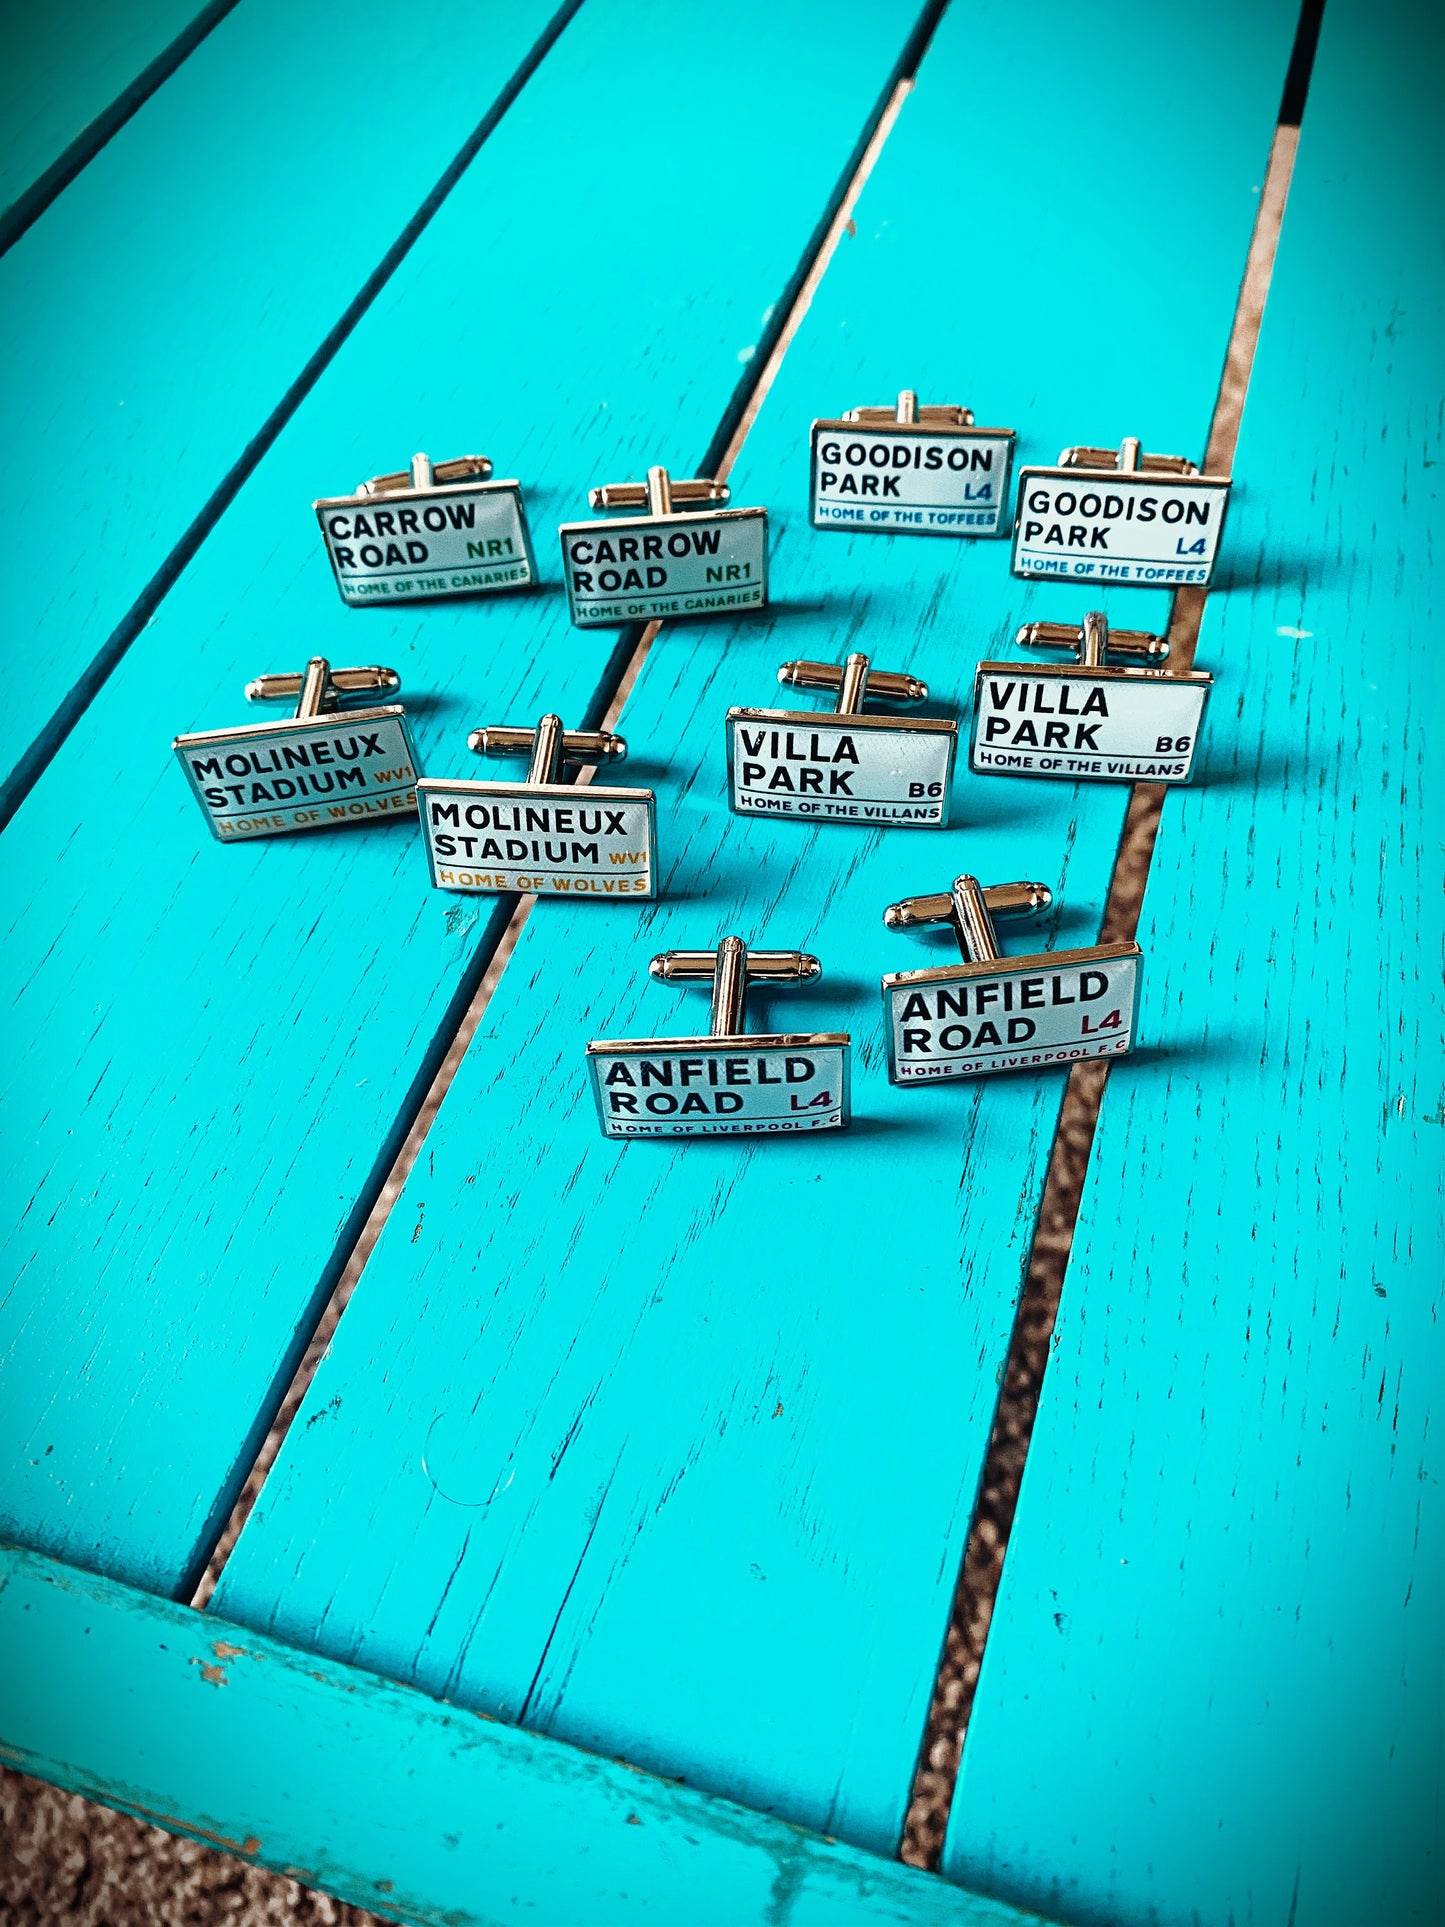 Sale Sharks Rugby Stadium Cufflinks. AJ Bell Stadium. Gift for Sharks Fan. Road Sign Tie Bar Personalised Street Name. Christmas. Wedding.